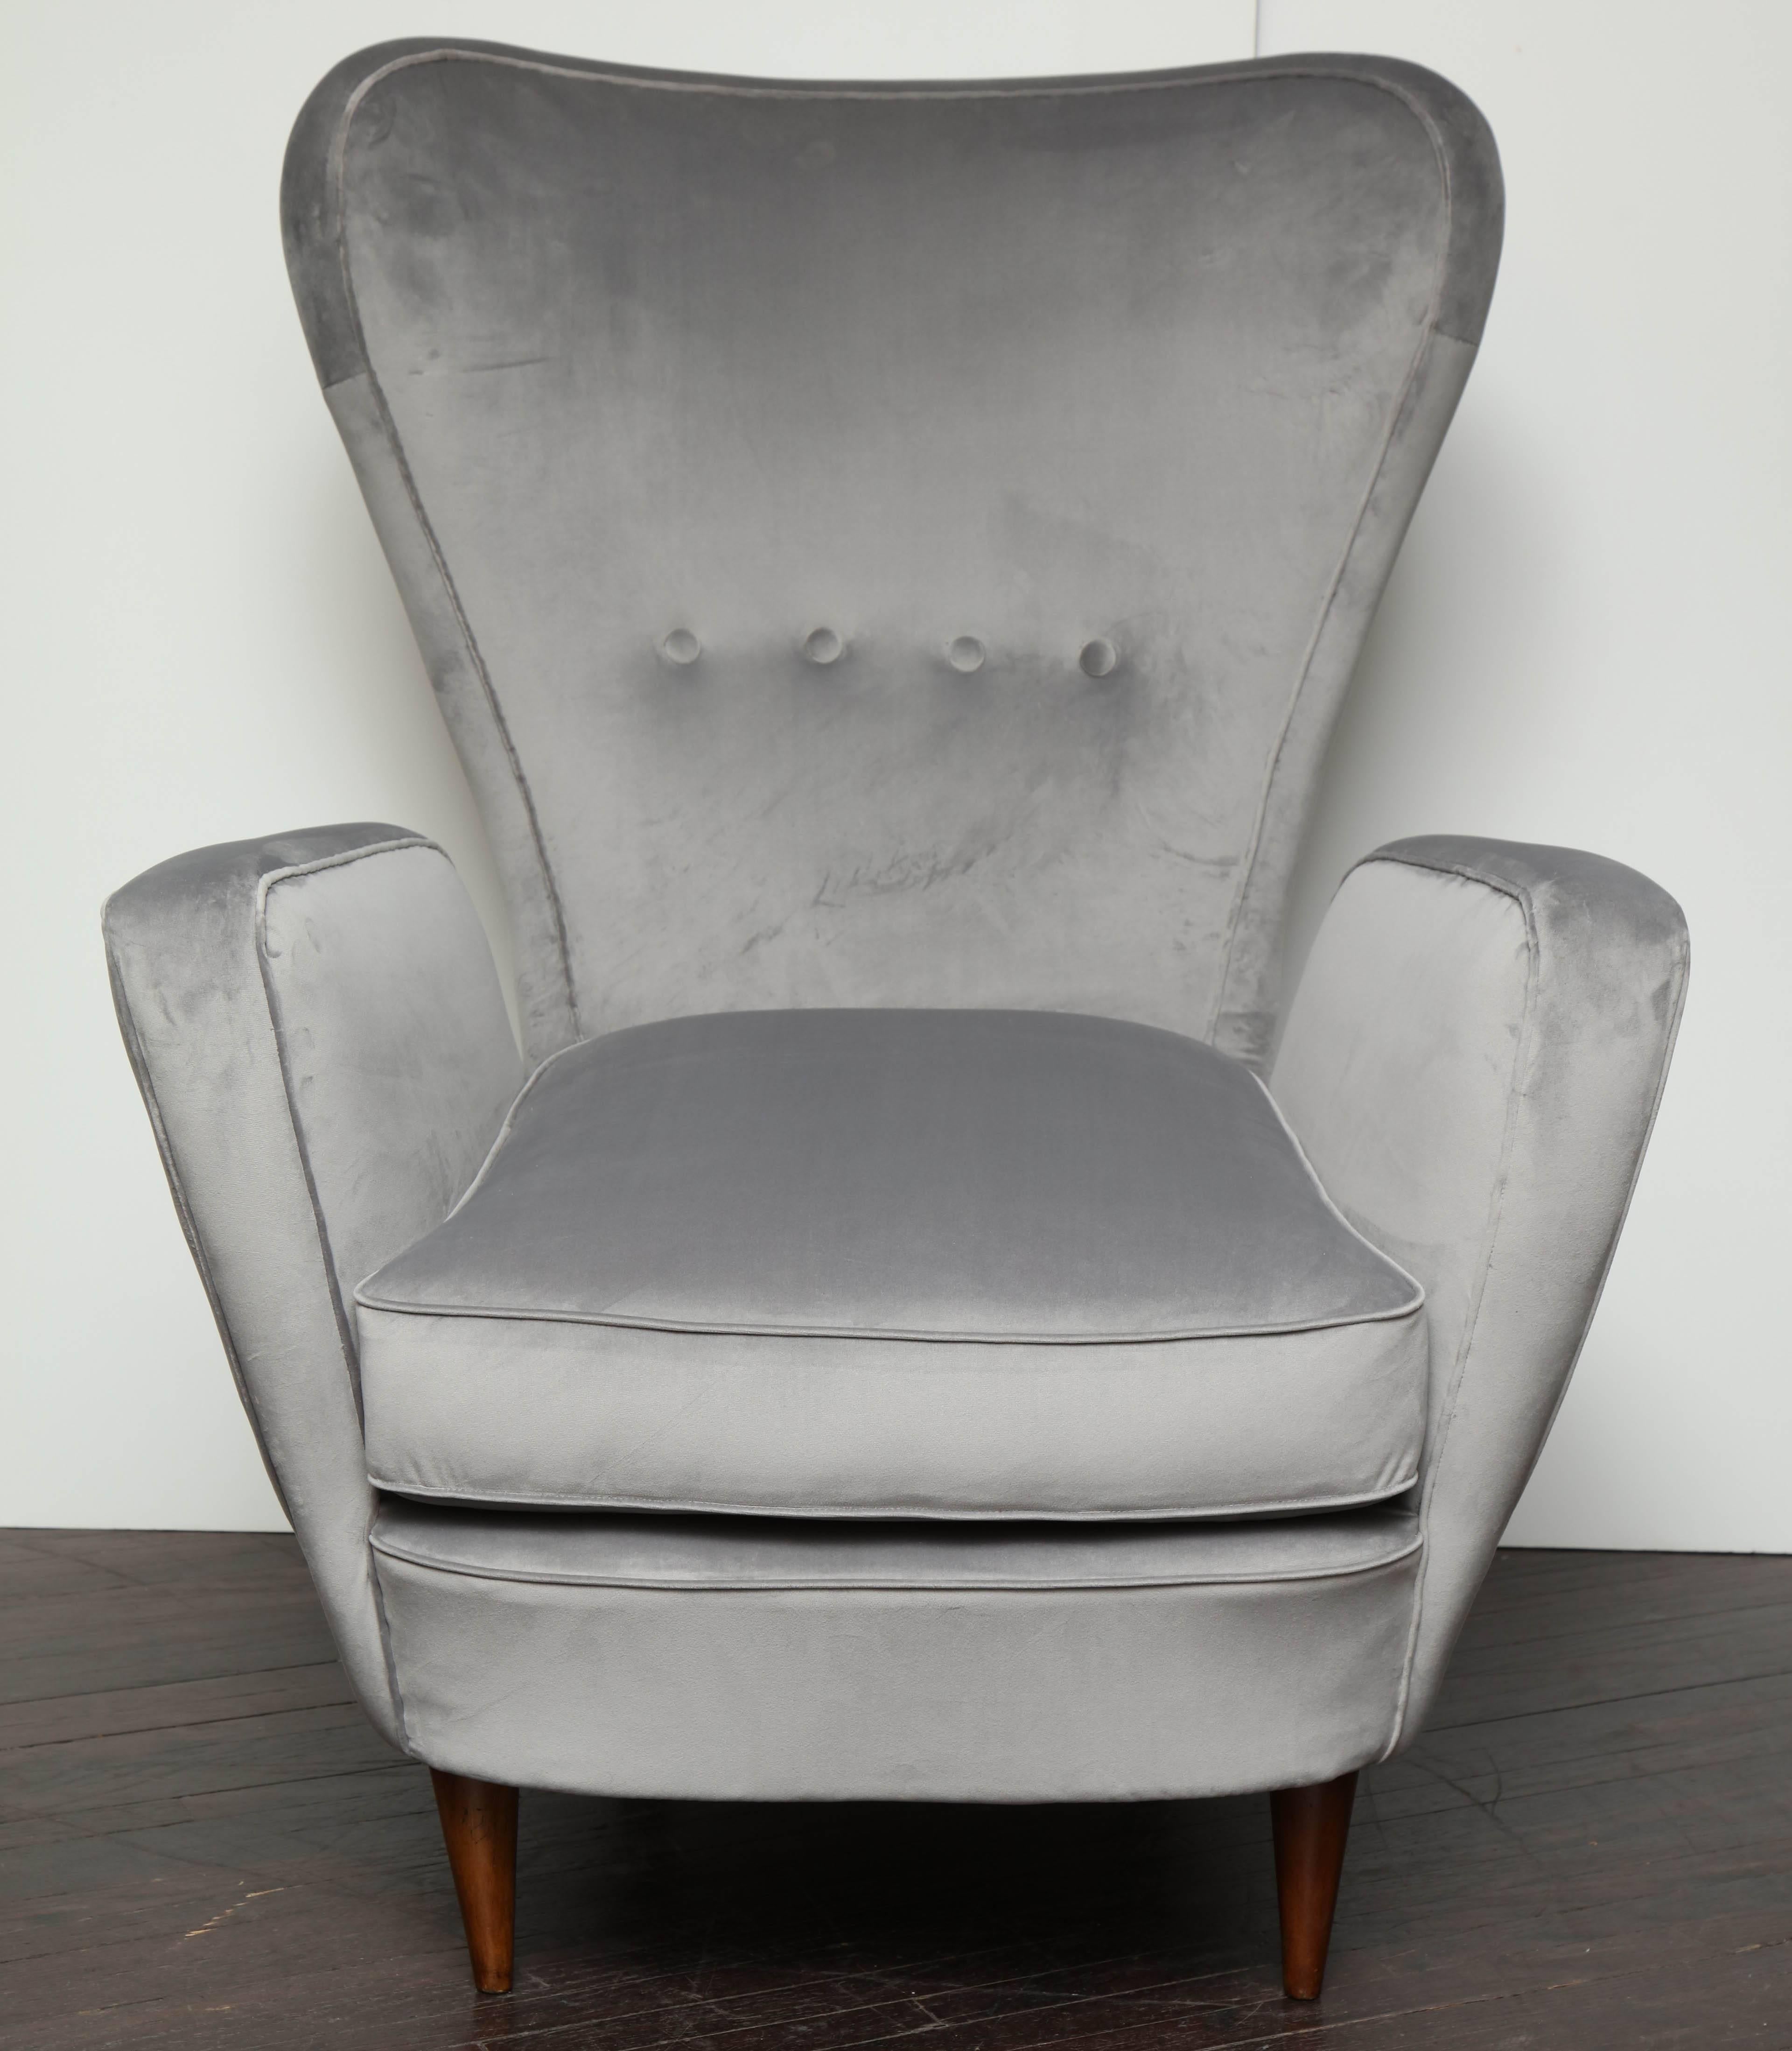 A single vintage Italian high back chair in silver velvet. The chair has unique Gio Ponti like curvature lines and tufted backrest. All the upholstery is brand new.